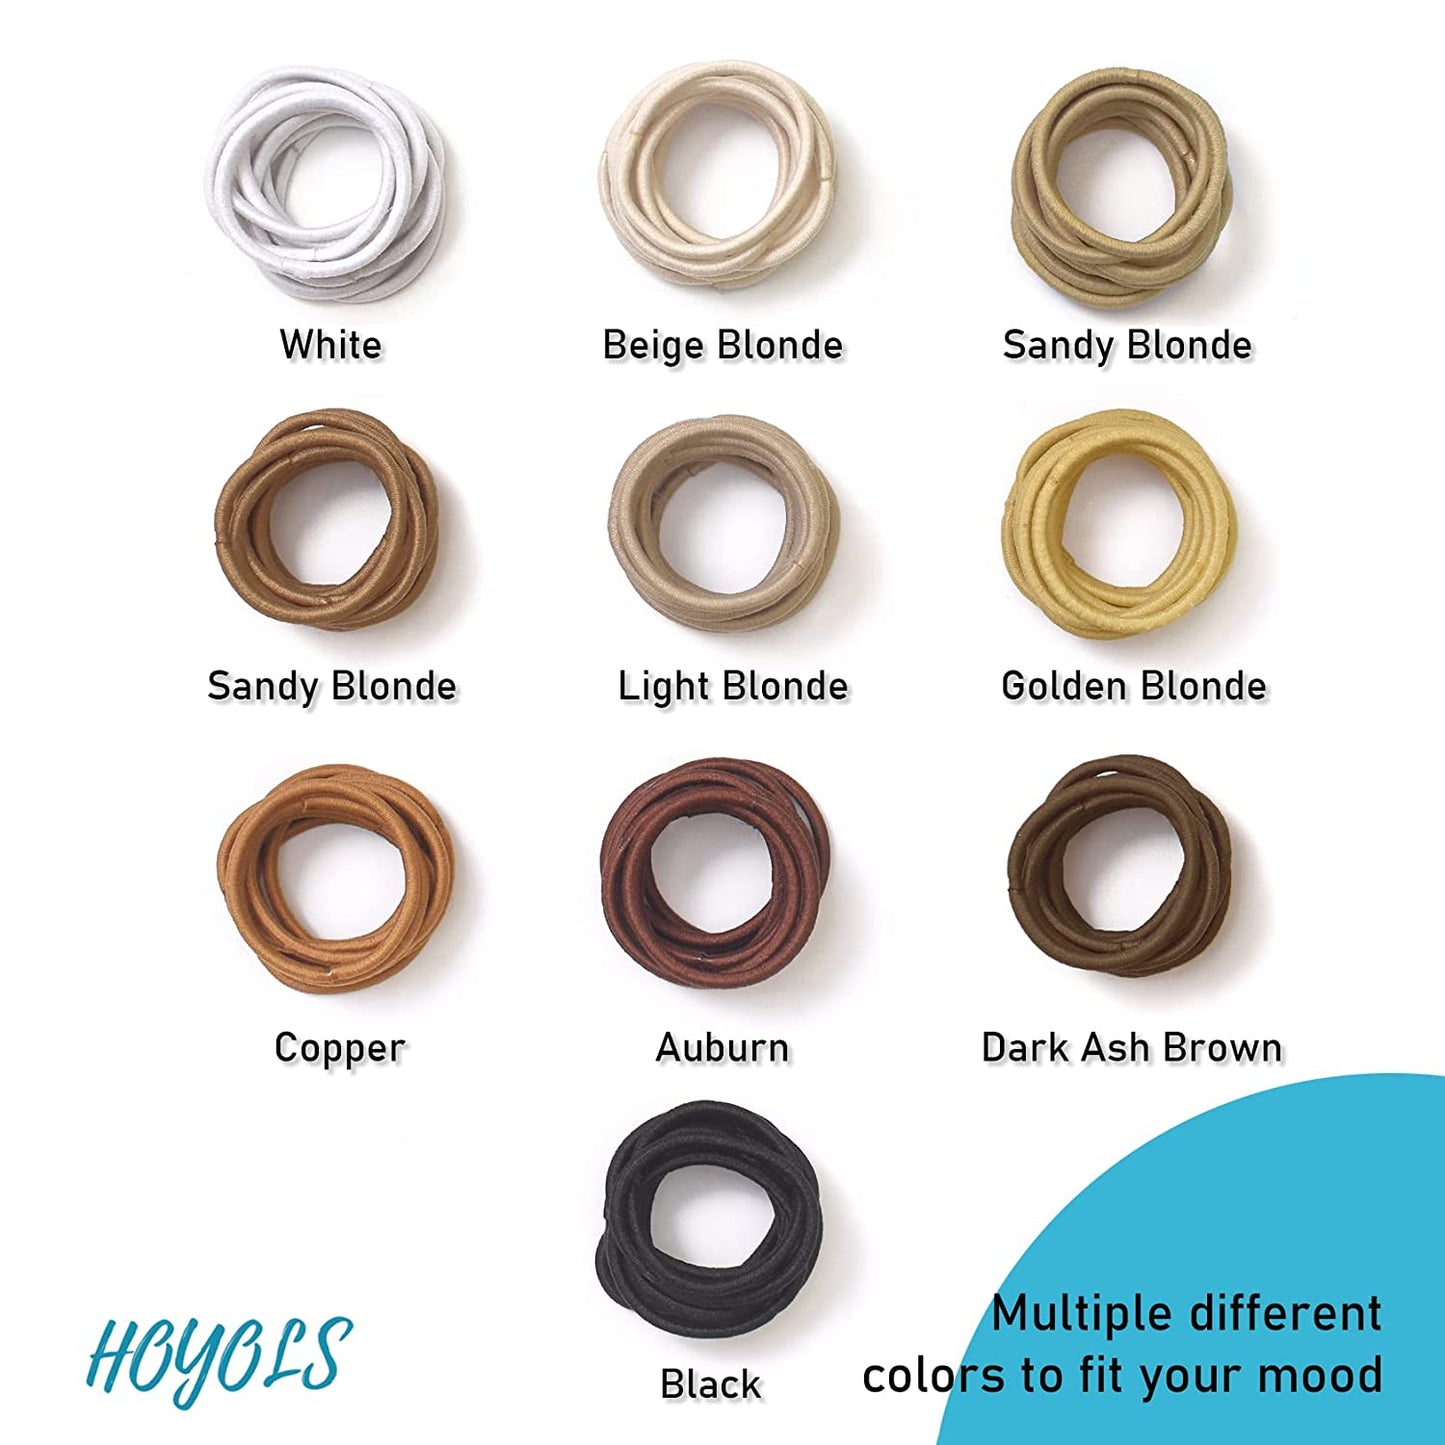 Hoyols Small Thin Hair Elastics & Ties, Beige Blonde Ponytail Holder for Thick Girls Hair Ties for Fine Hair Styling Accessories, 2mm 100 Count (Beige Blonde)